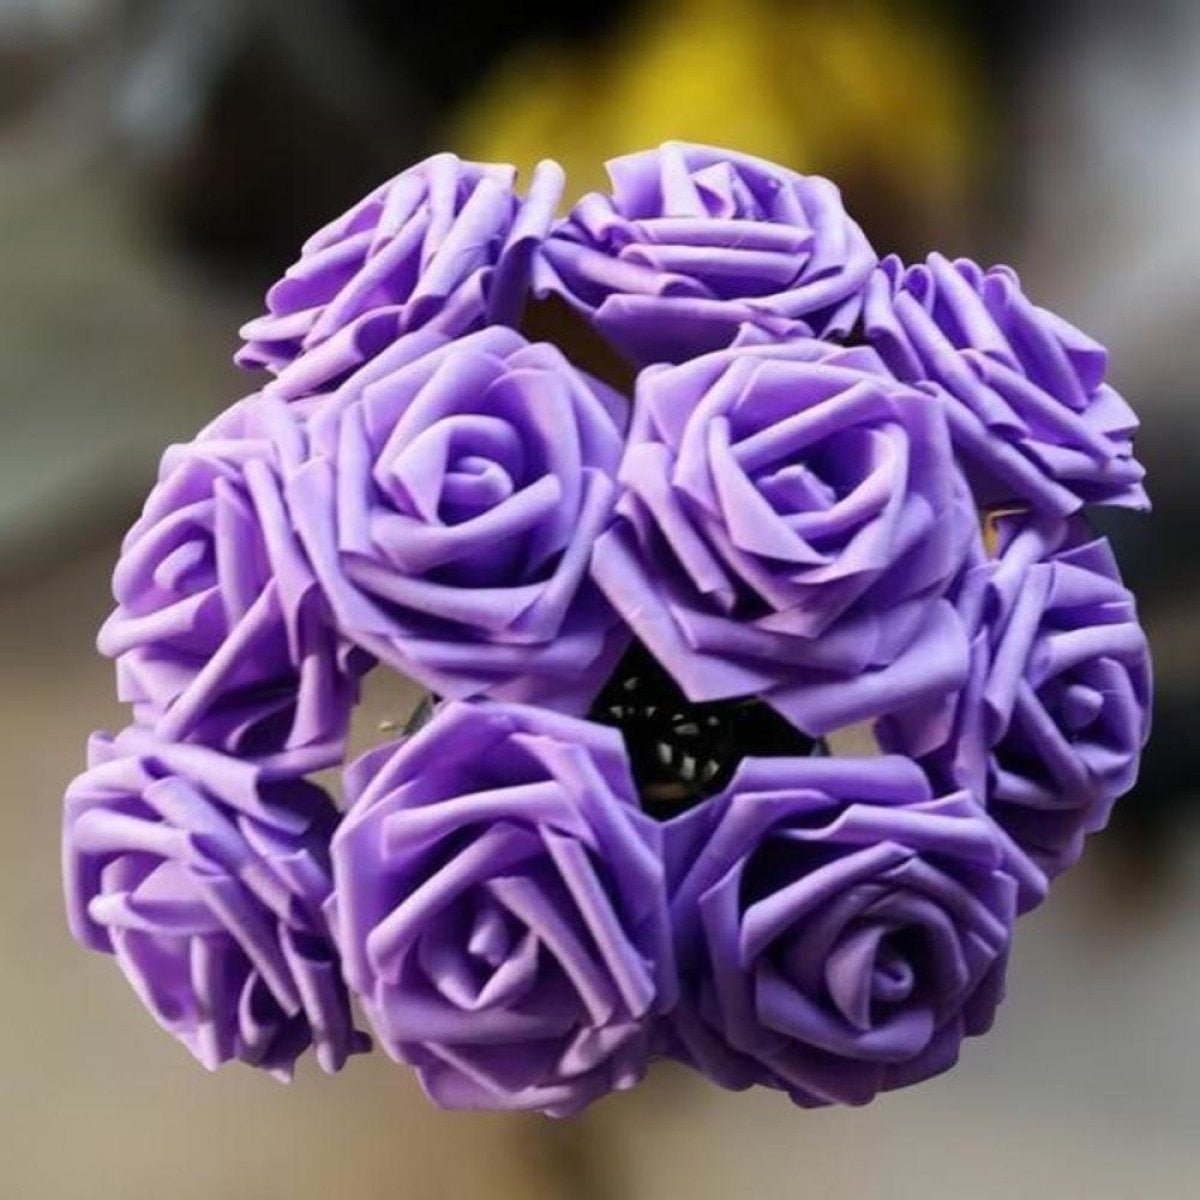 20pcs 7cm Artificial Flowers with Stems Foam Rose Fake Bride Bouquet Wedding - Purple - - Asia Sell